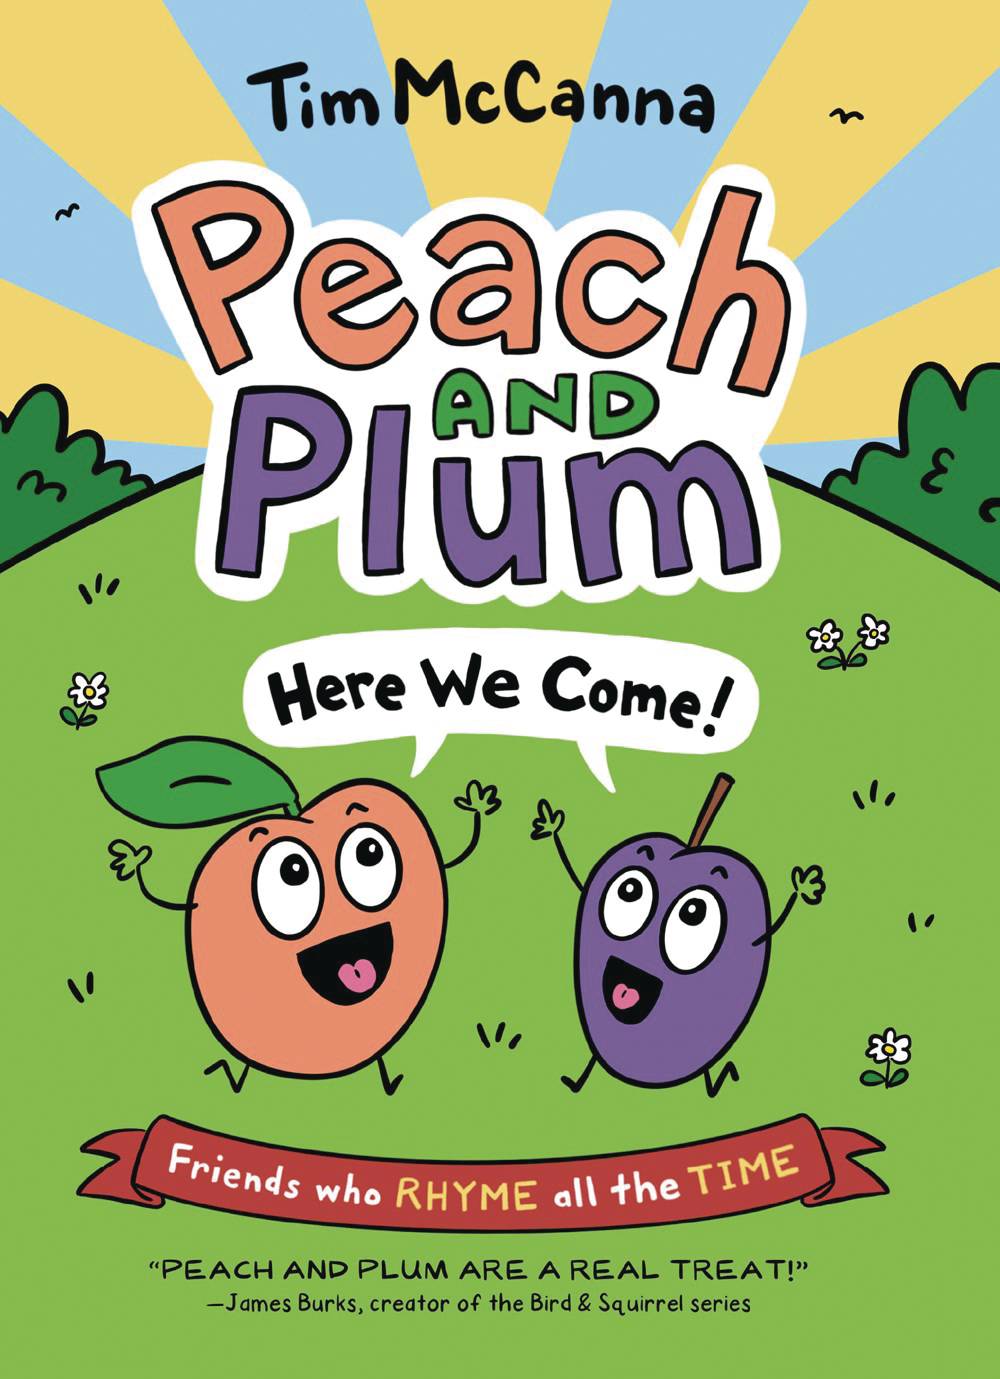 The One Stop Shop Comics & Games Peach And Plum Here We Come Gn In Rhyme (C: 0-1-0) (08/03/2022) LITTLE BROWN BOOK FOR YOUNG RE